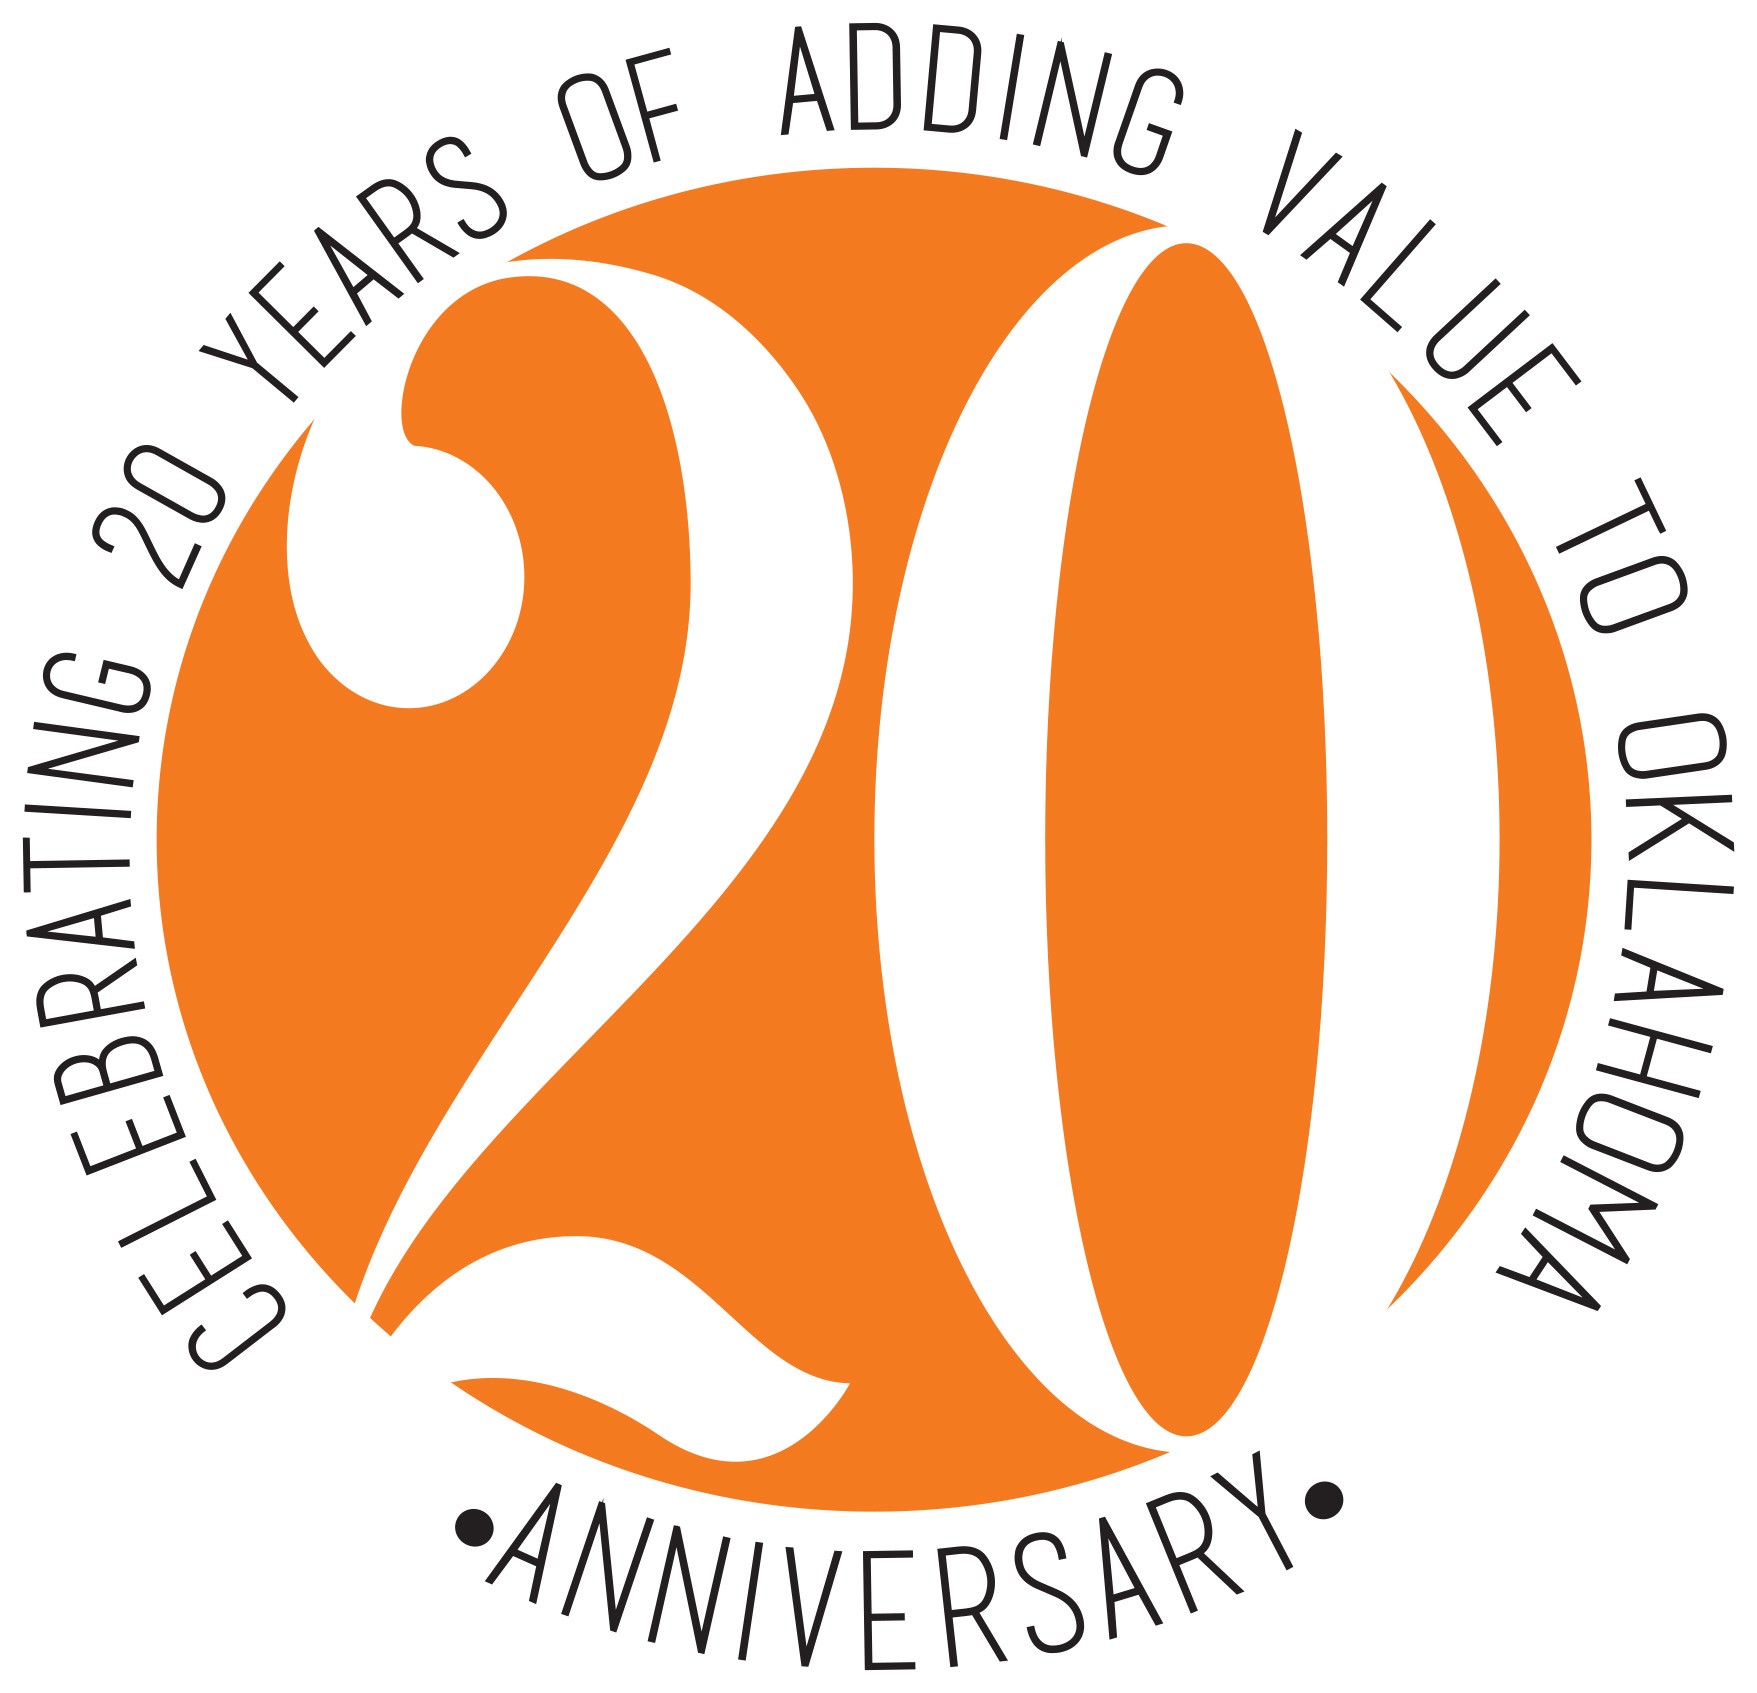 FAPC to Celebrate 20 Years of Stimulating and Supporting Growth in Food and Agricultural Products